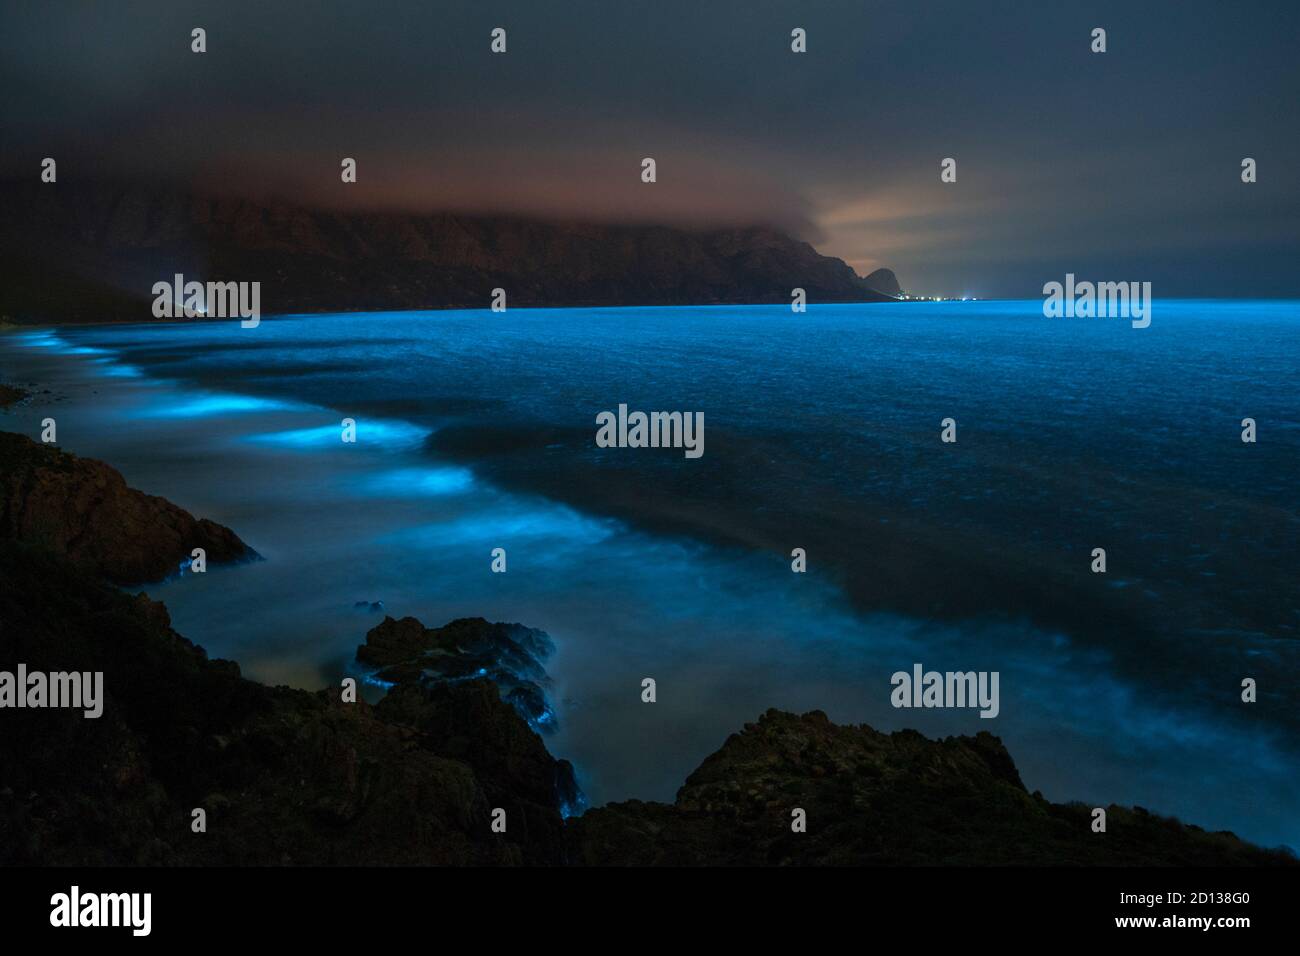 Bioluminescent phytoplankton illuminating the ocean along the coast at the Kogelberg Biosphere Reserve near Cape Town, South Africa. Stock Photo